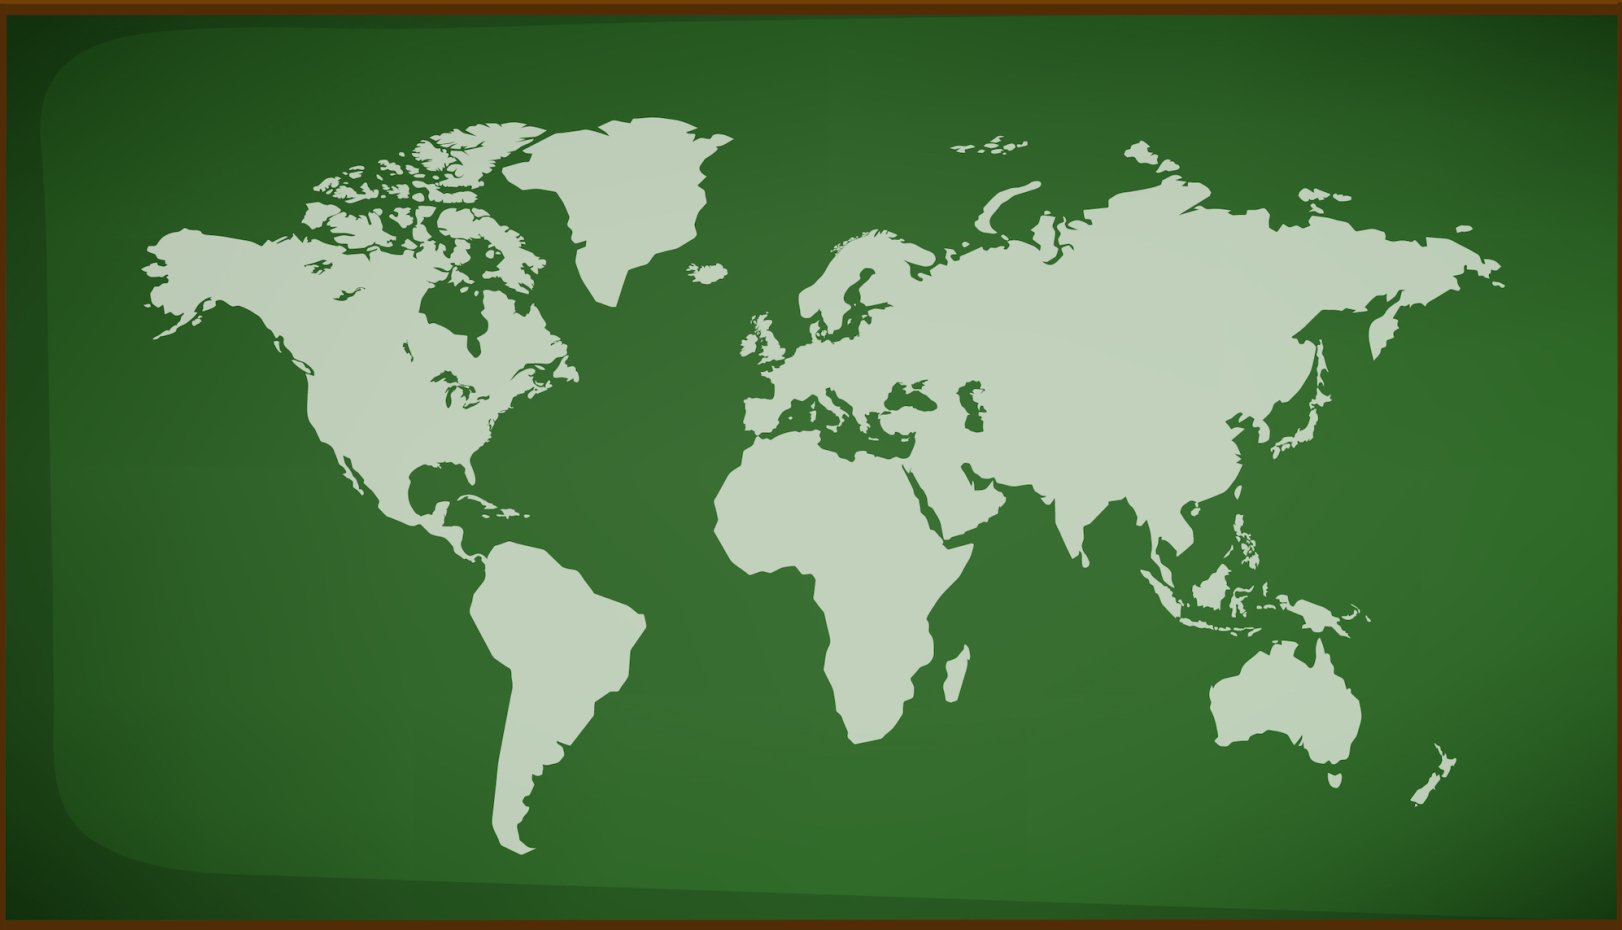 Map of the world against a green background